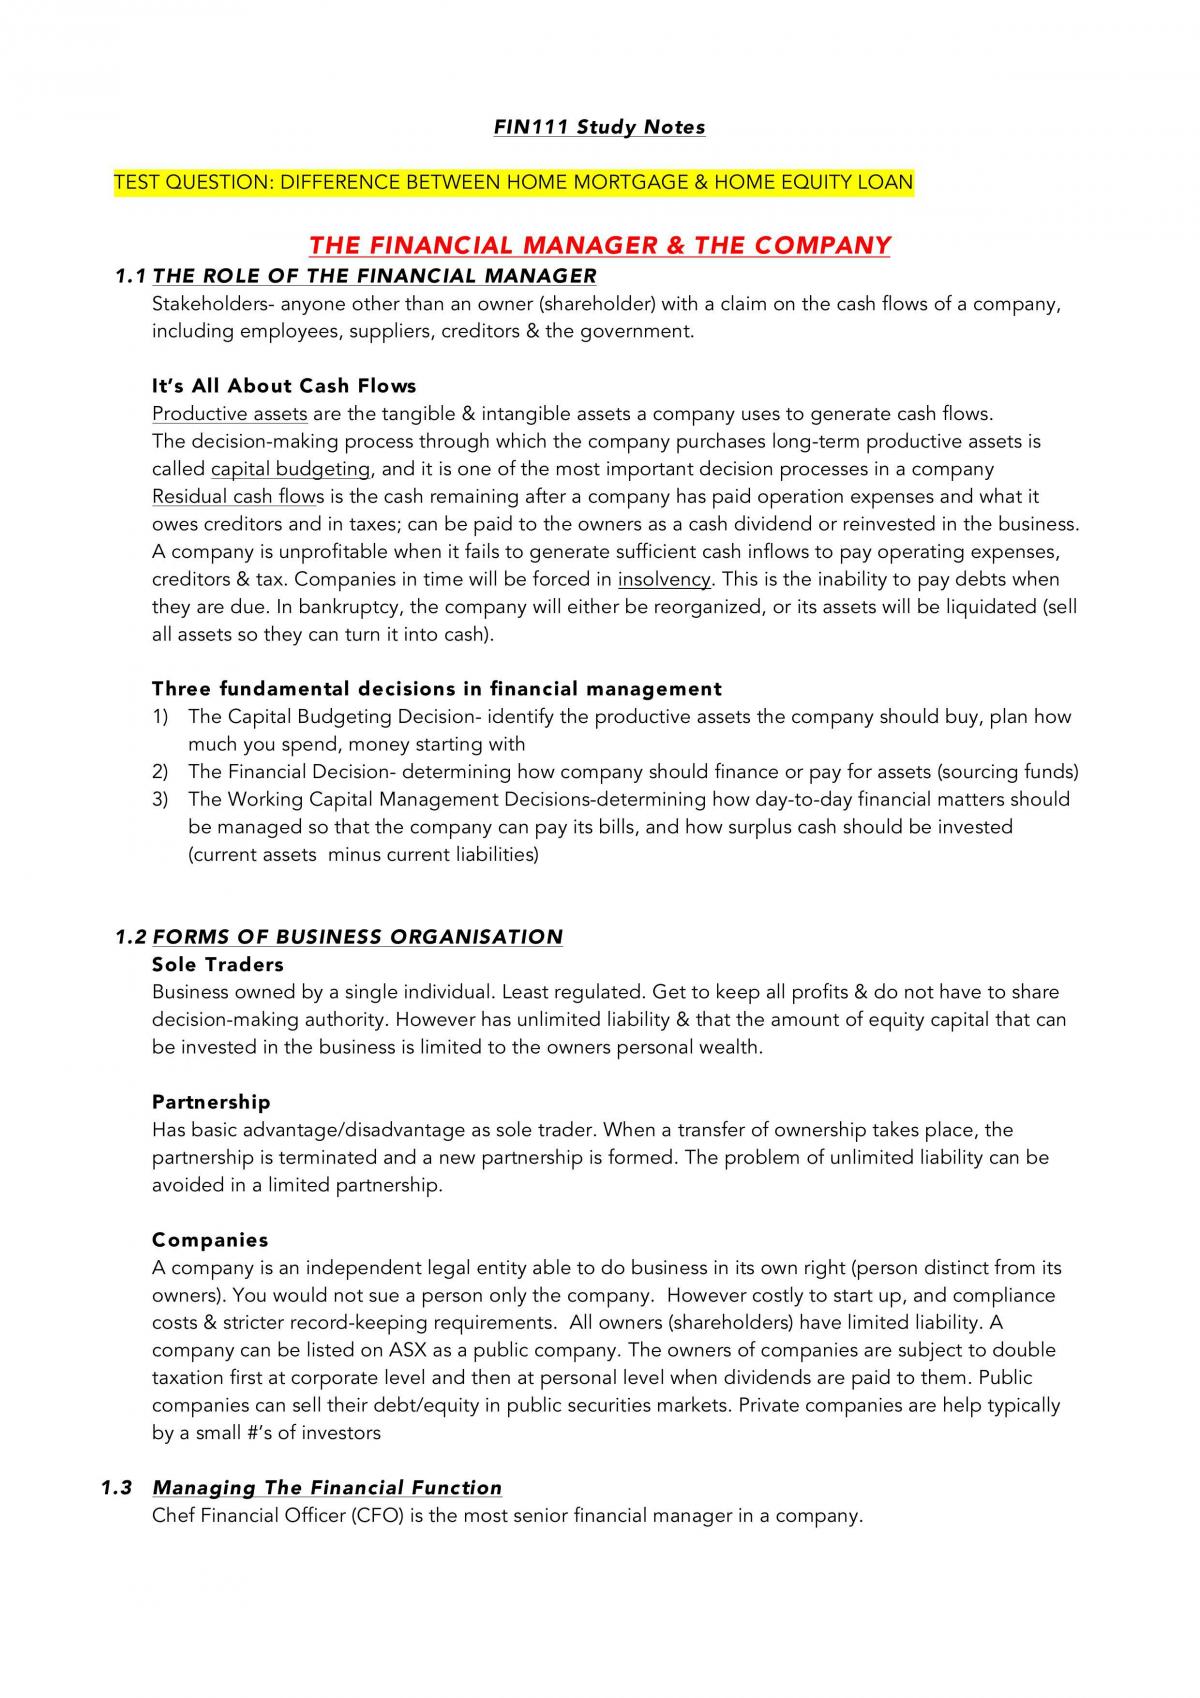 Introductory Principles of Finance - Page 1